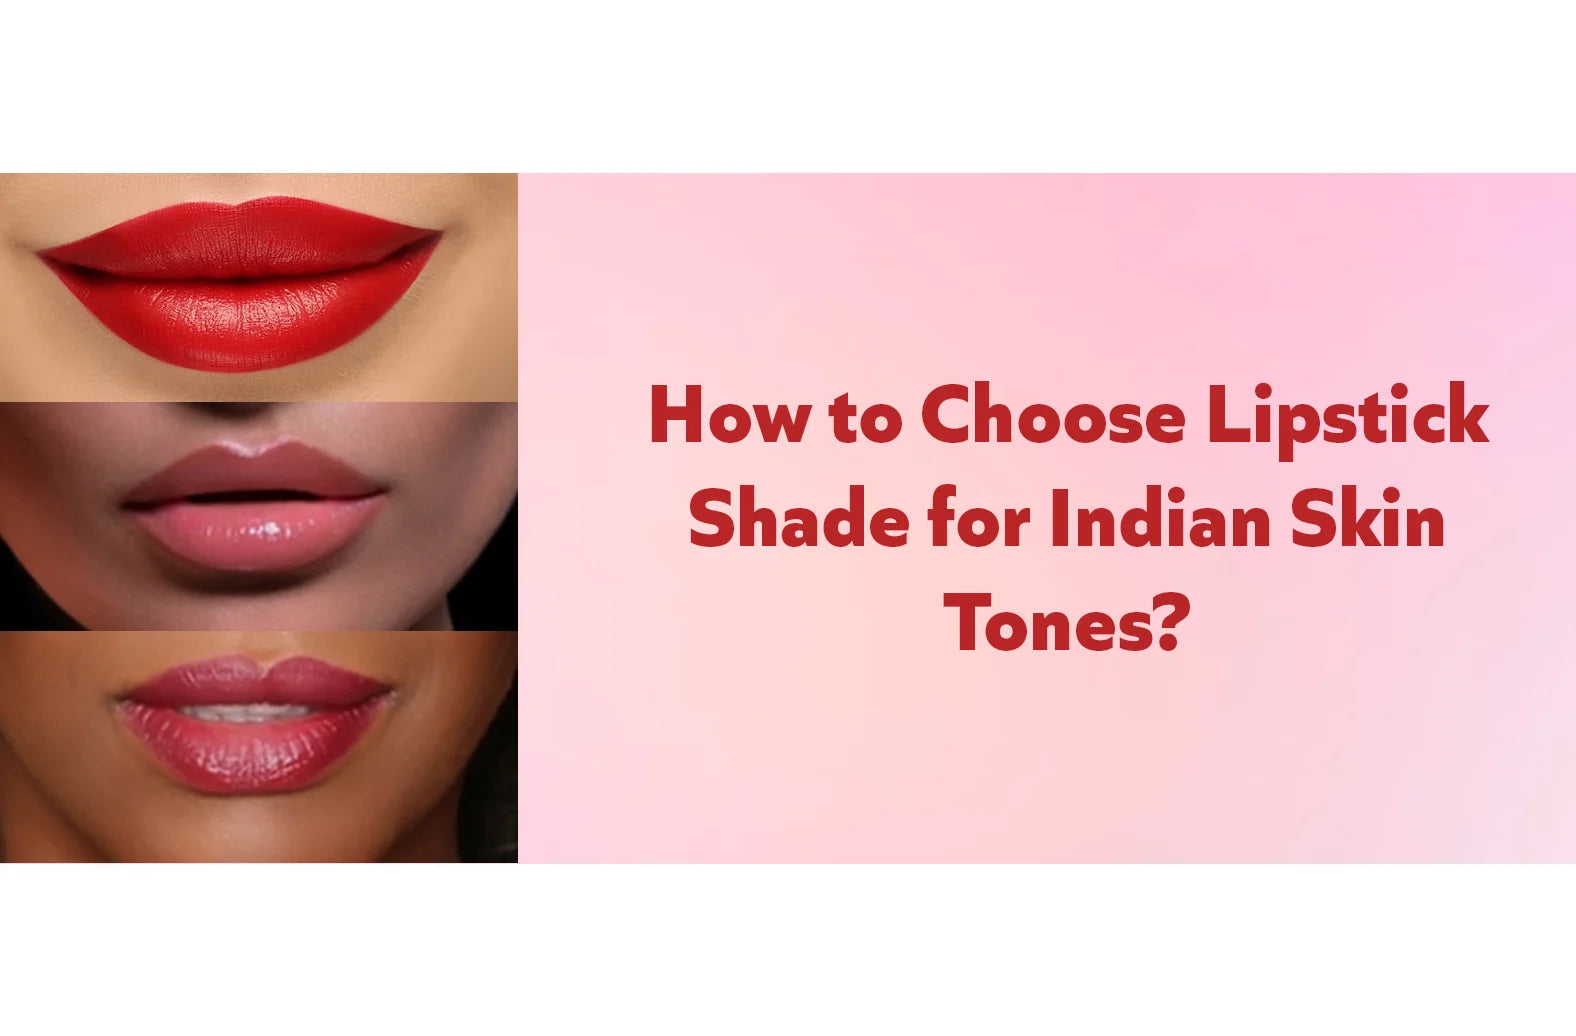 How to choose lipstick shades?